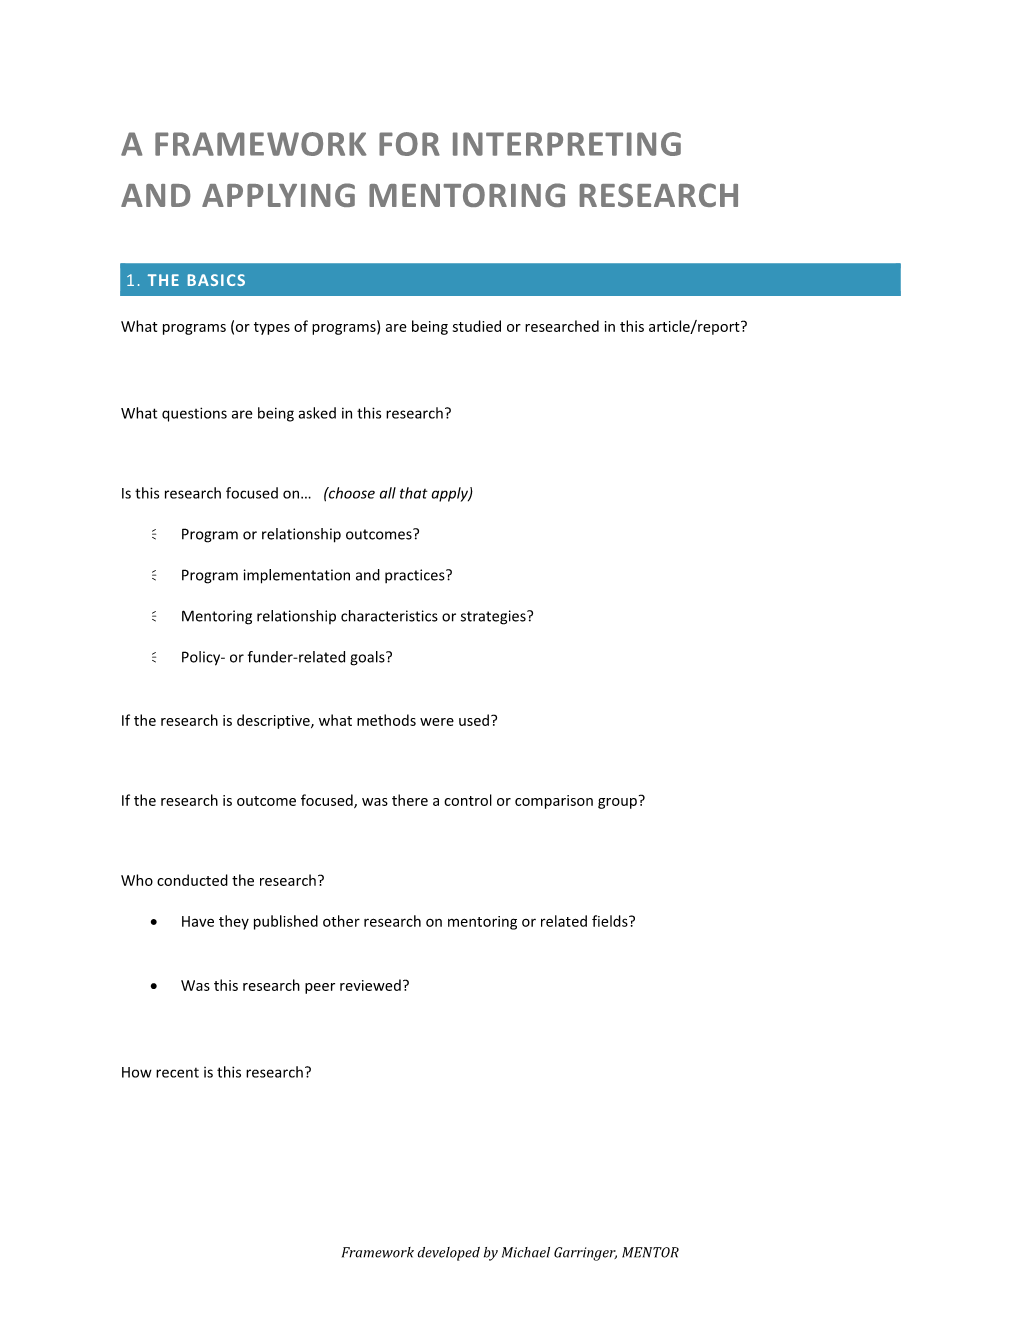 A Framework for Interpreting and APPLYING Mentoring Research